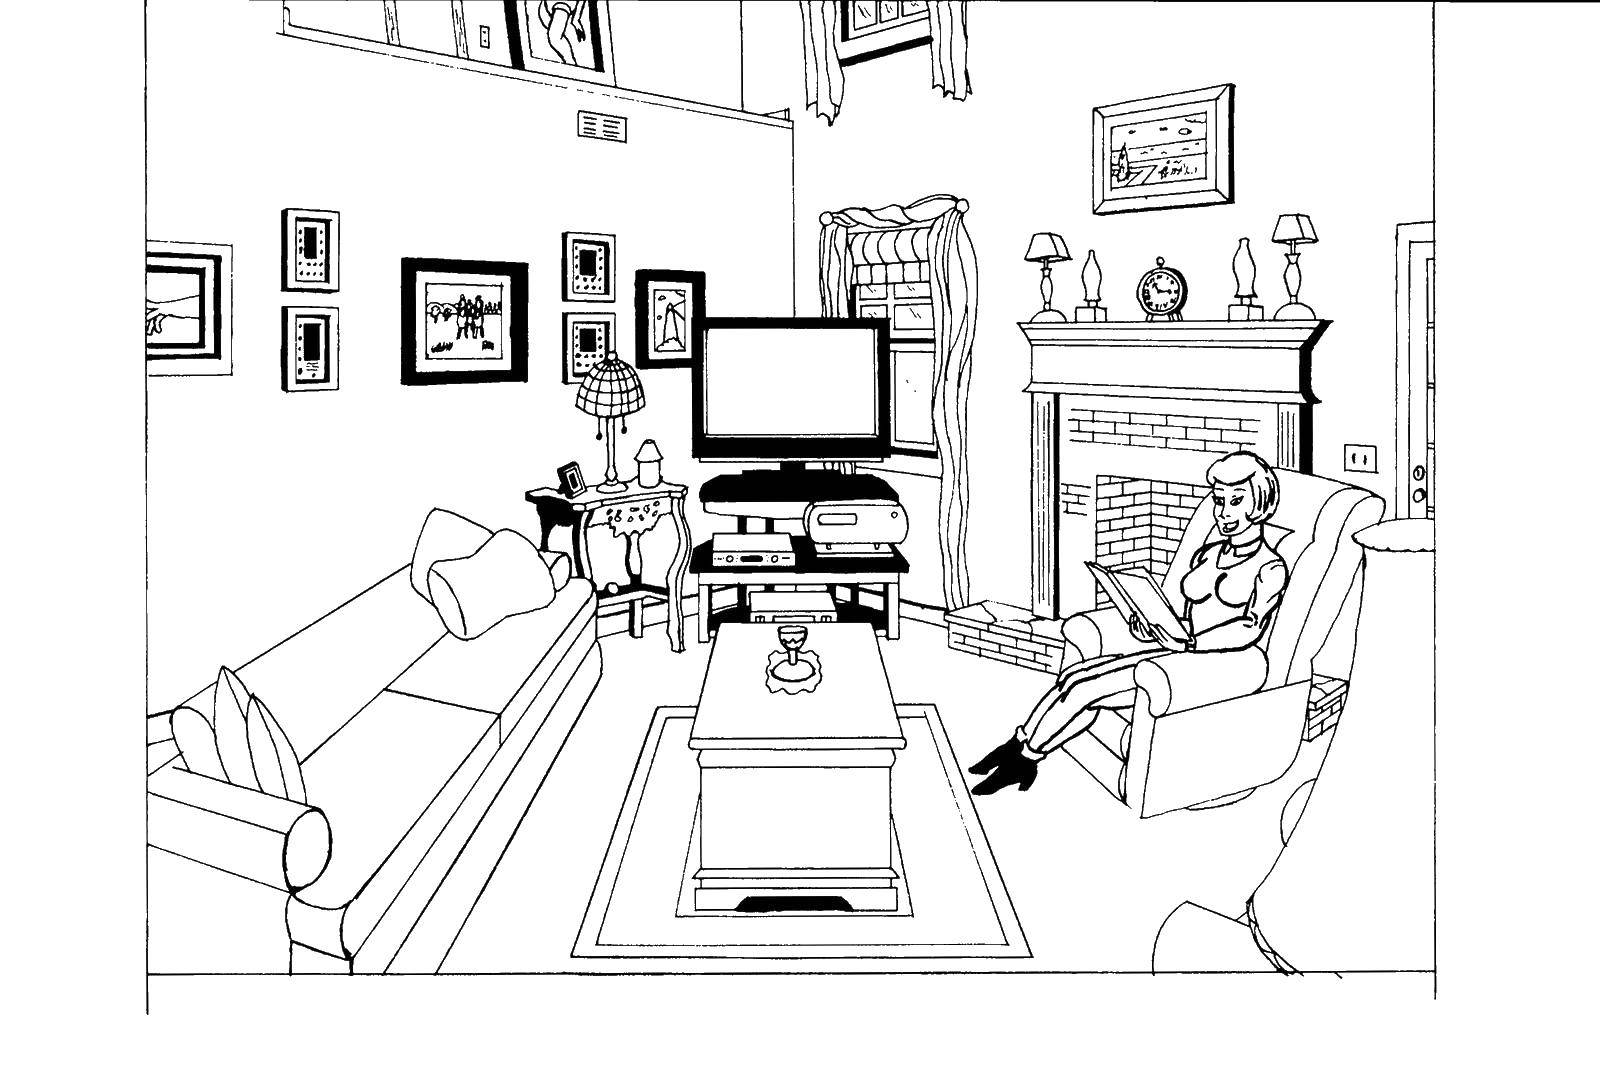 Coloring The girl in the living room. Category Bedroom. Tags:  girl, TV, chair, table.